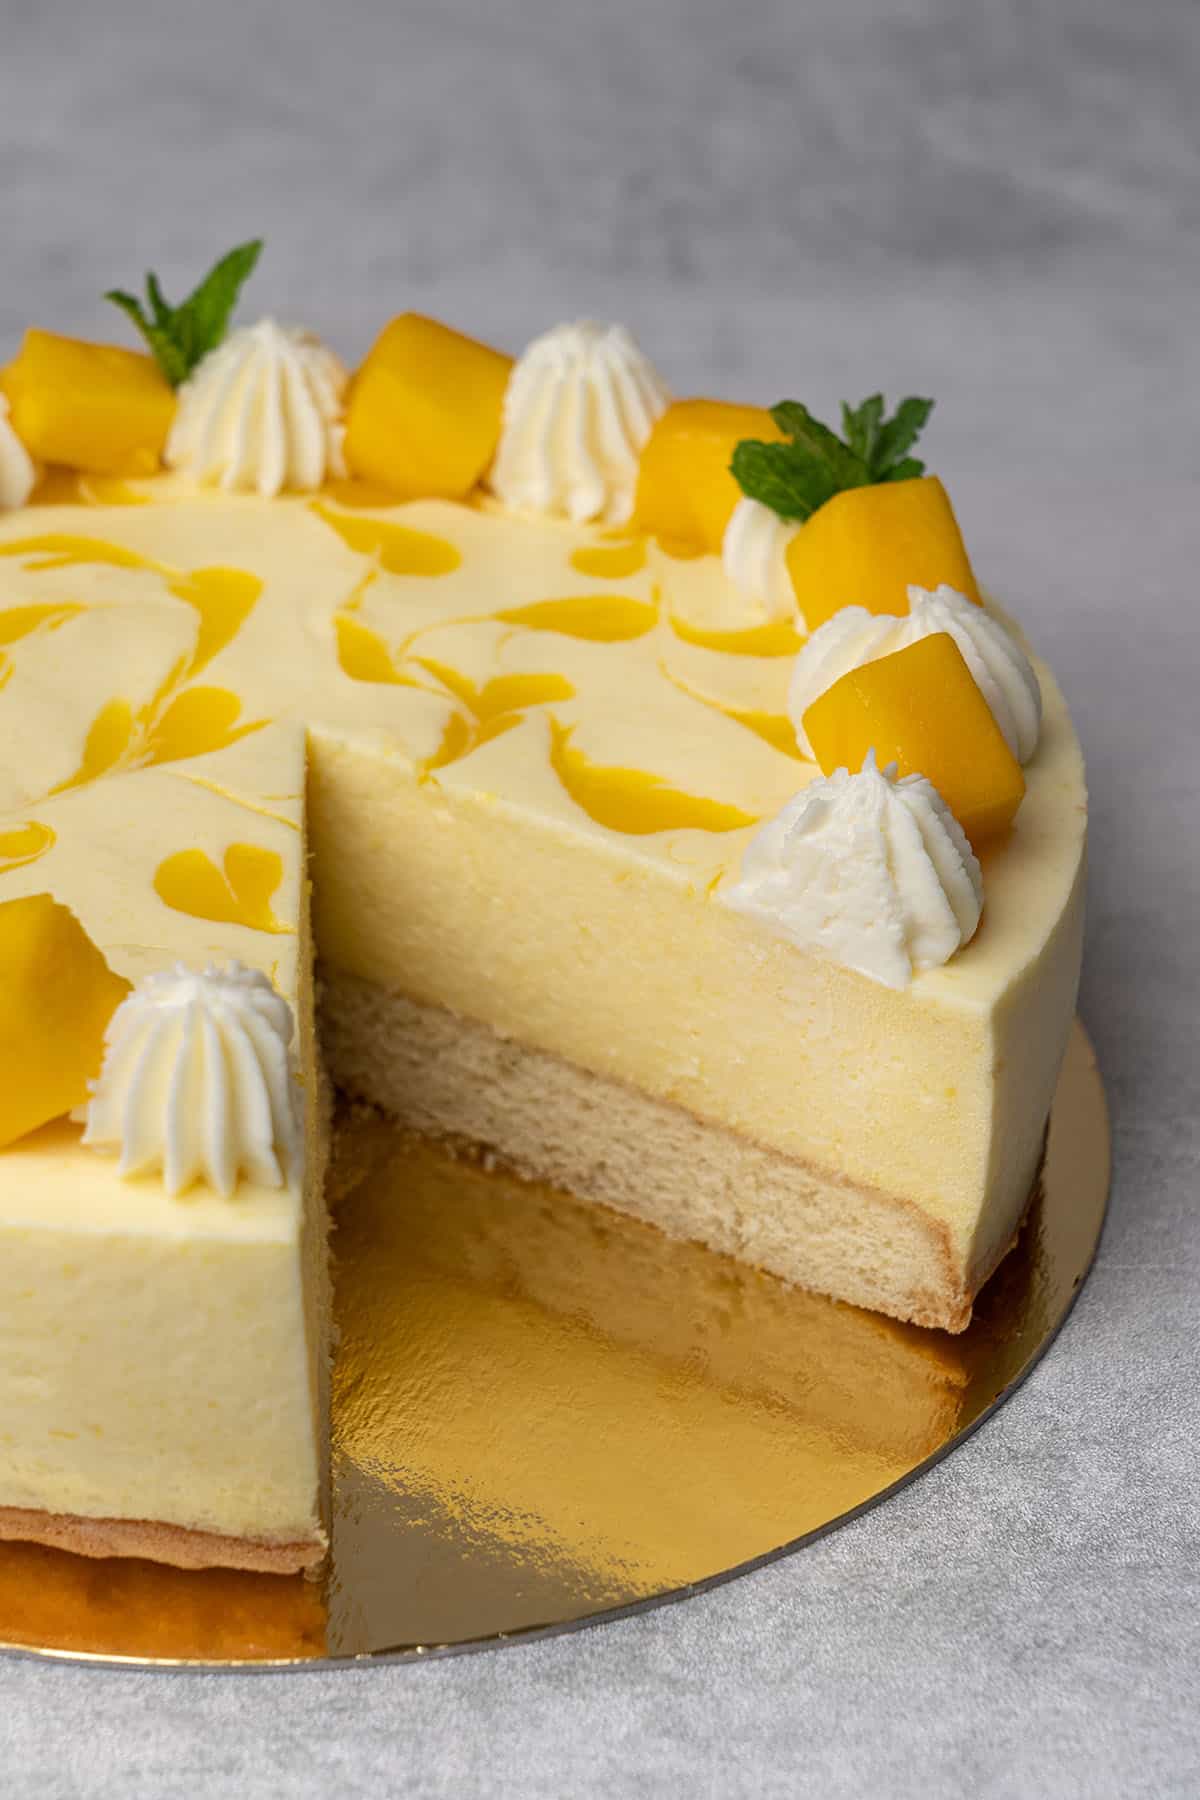 mango mousse cake with a slice taken out of it against a grey background